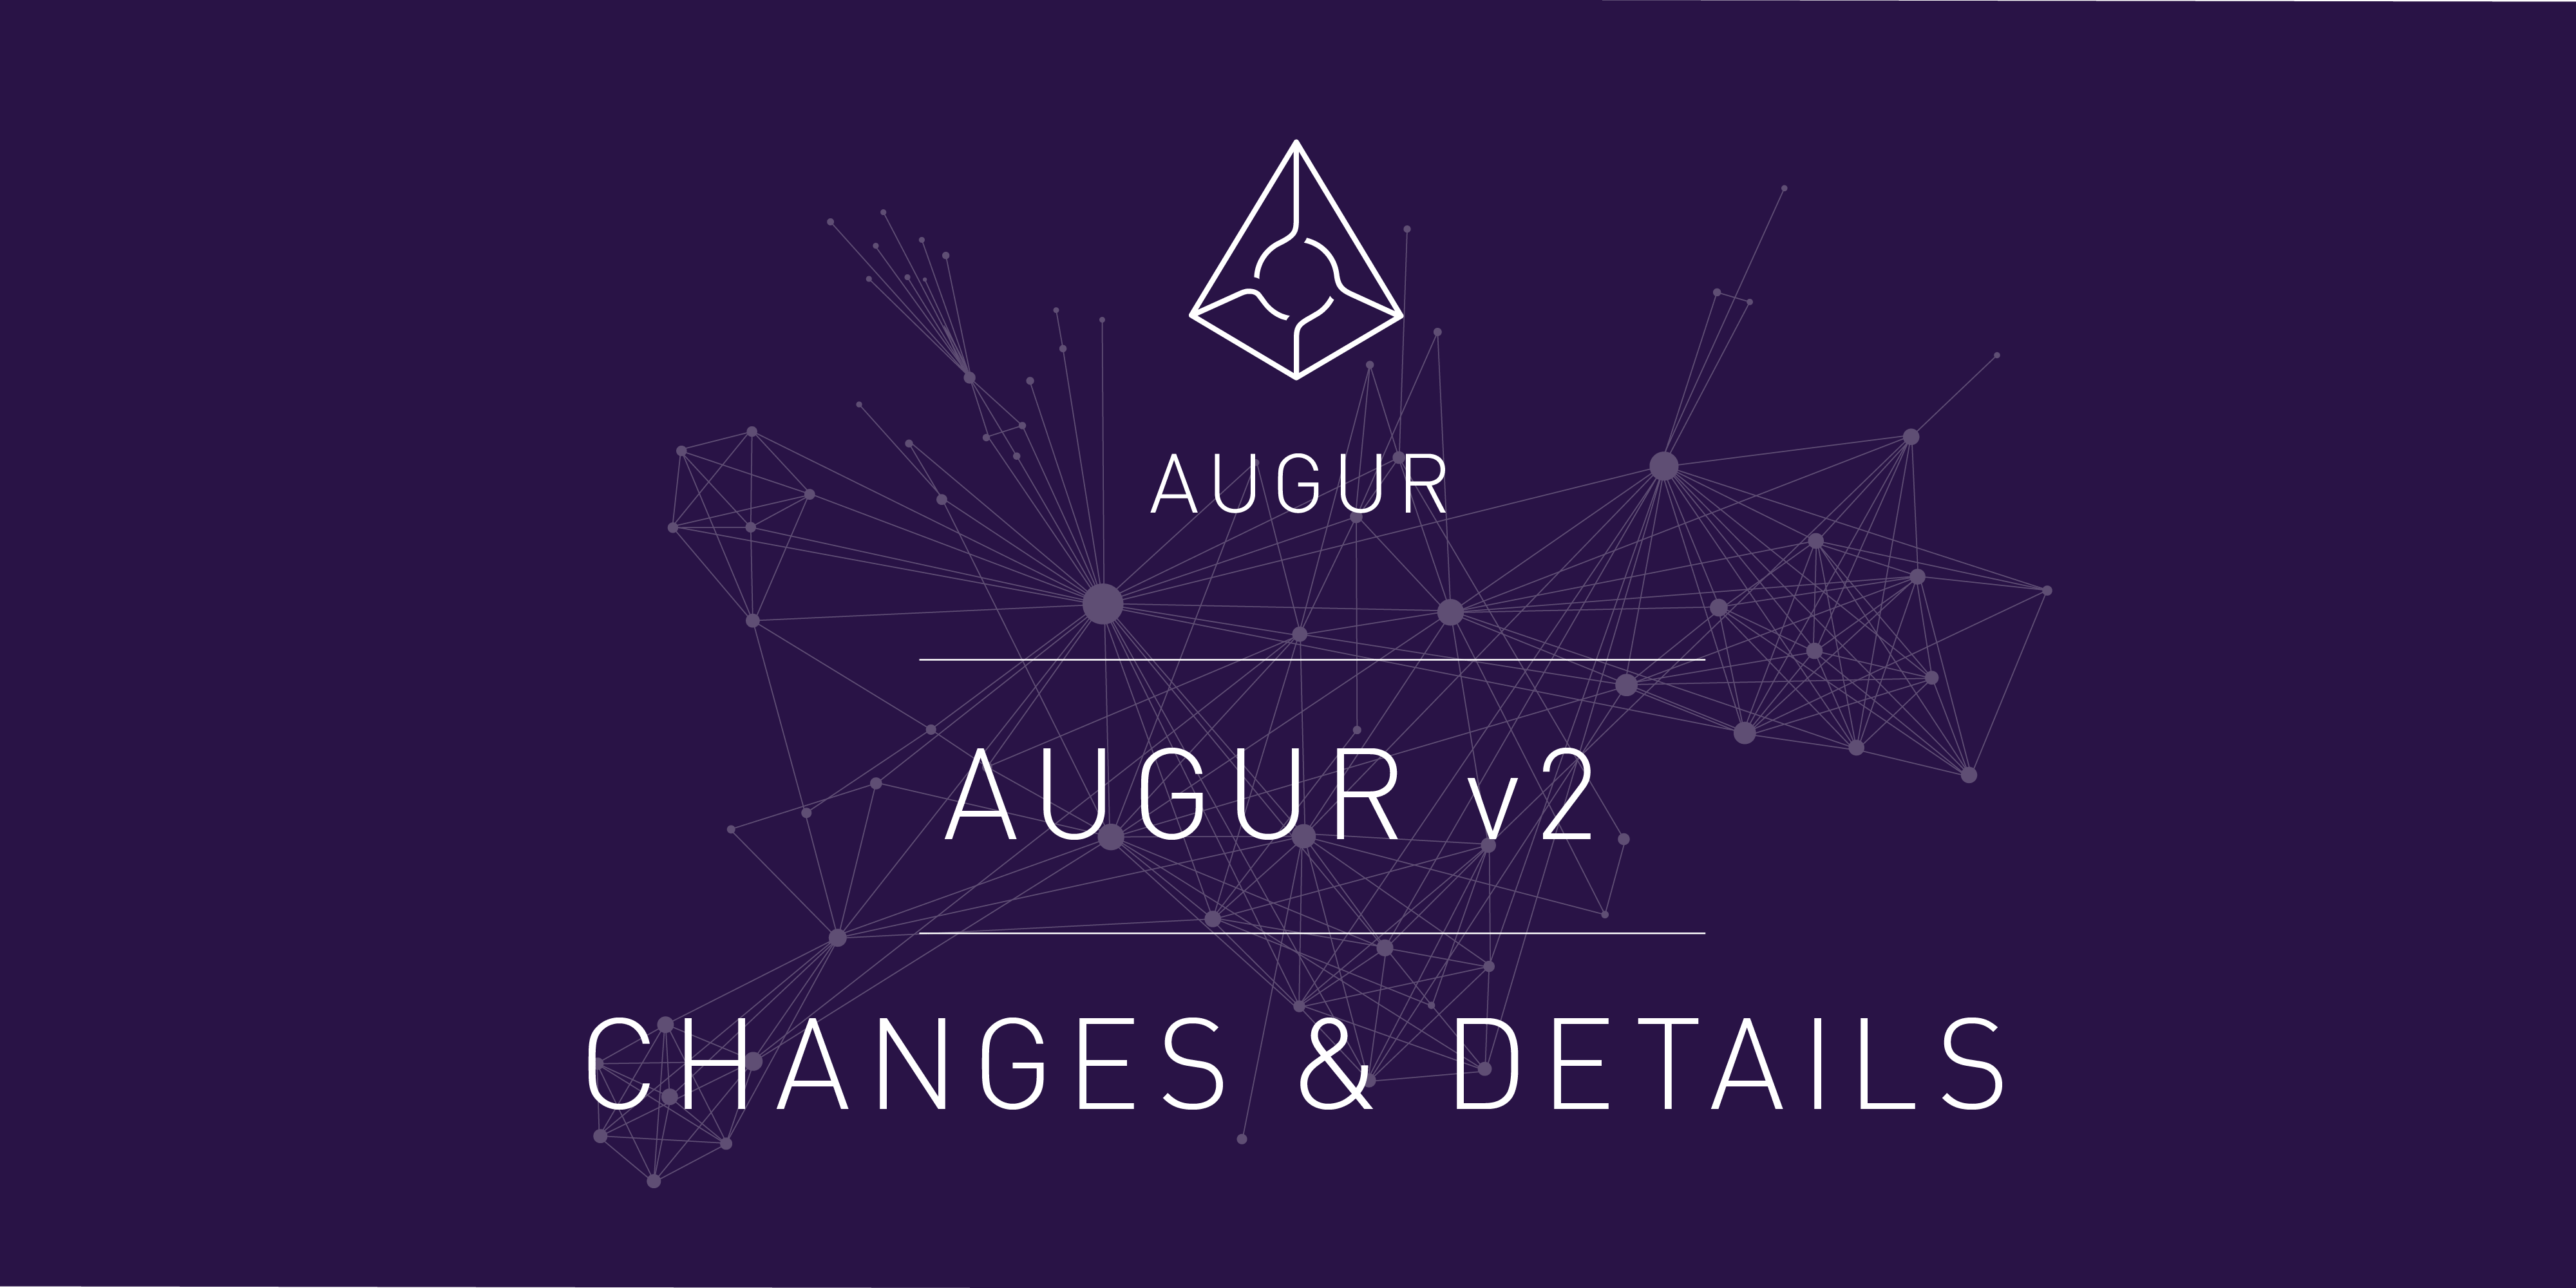 Augur v2 Comes On July 28th, Brings A New Token And REP Rename